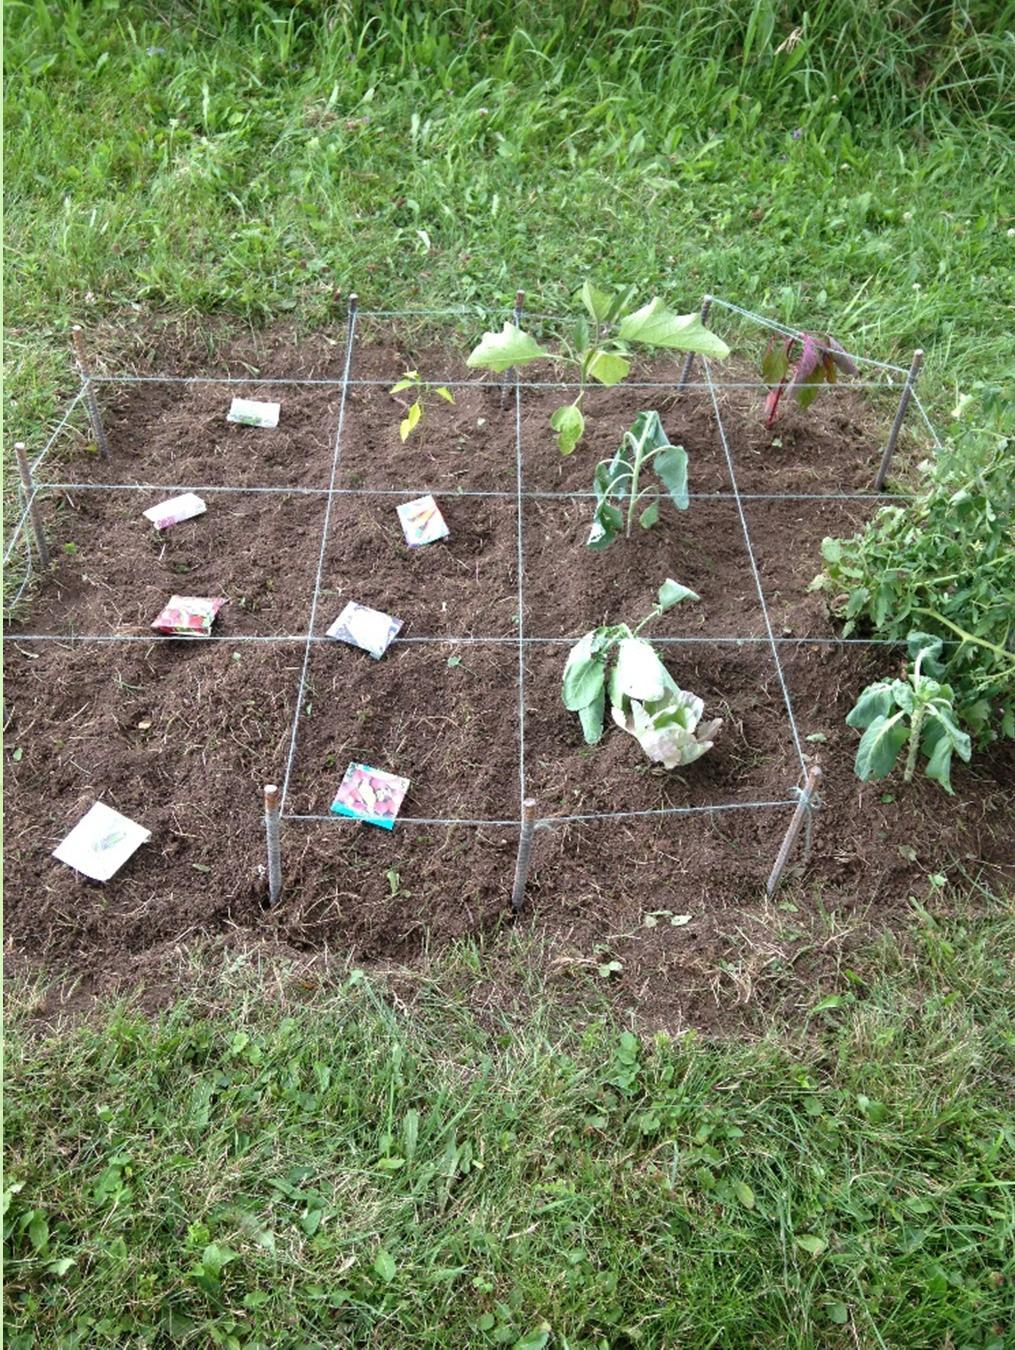 Dig In Gardening Gardens can be in ground (shown) or in a 4x4 planting box provided.